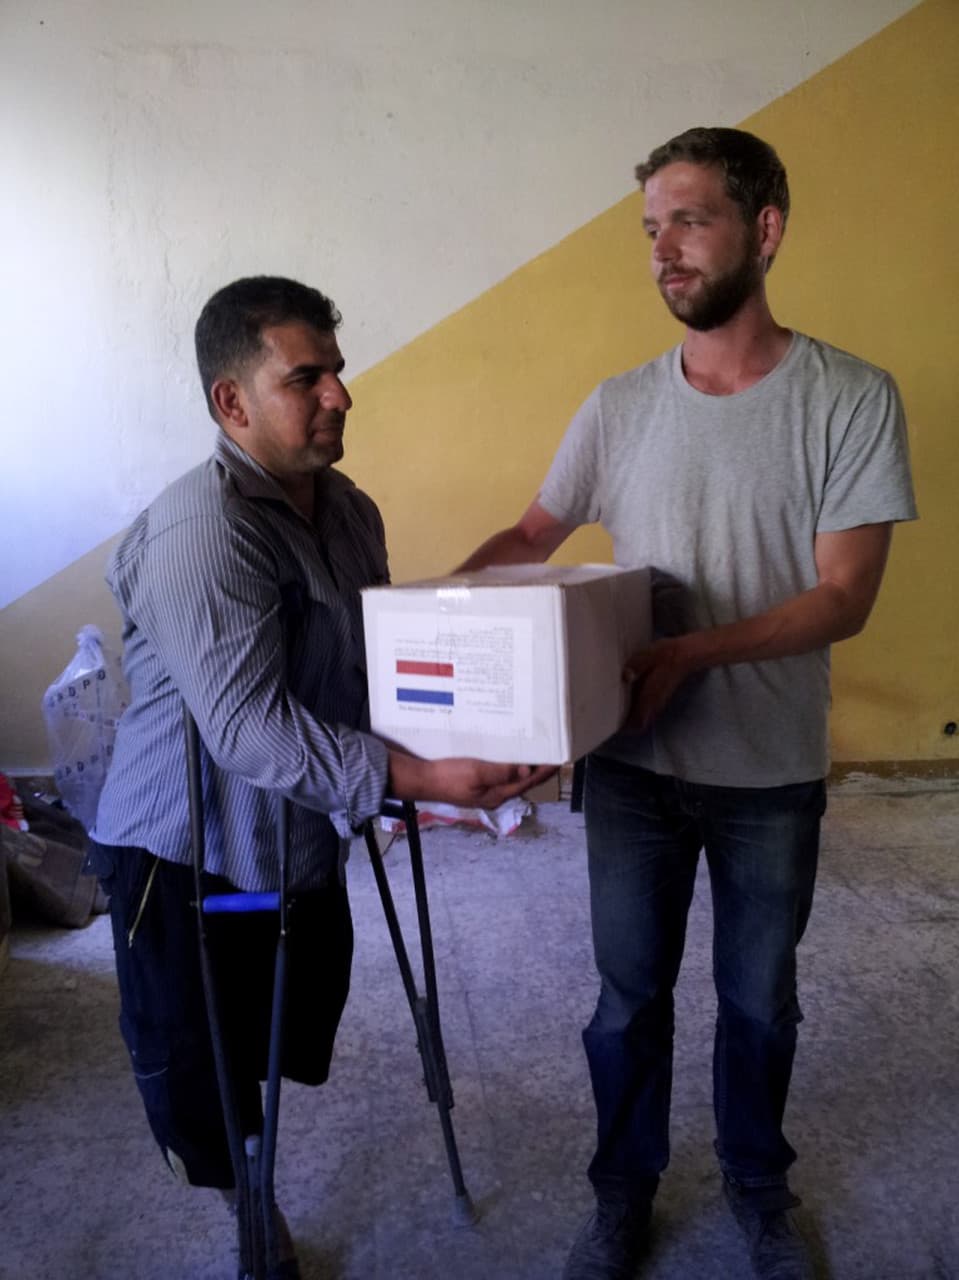 Local community leaders helped Wijbe to find the people that were most in need. Abma worked in Syria until the threat of being kidnapped made it too dangerous to continue providing aid. (Courtesy of Wijbe Abma)